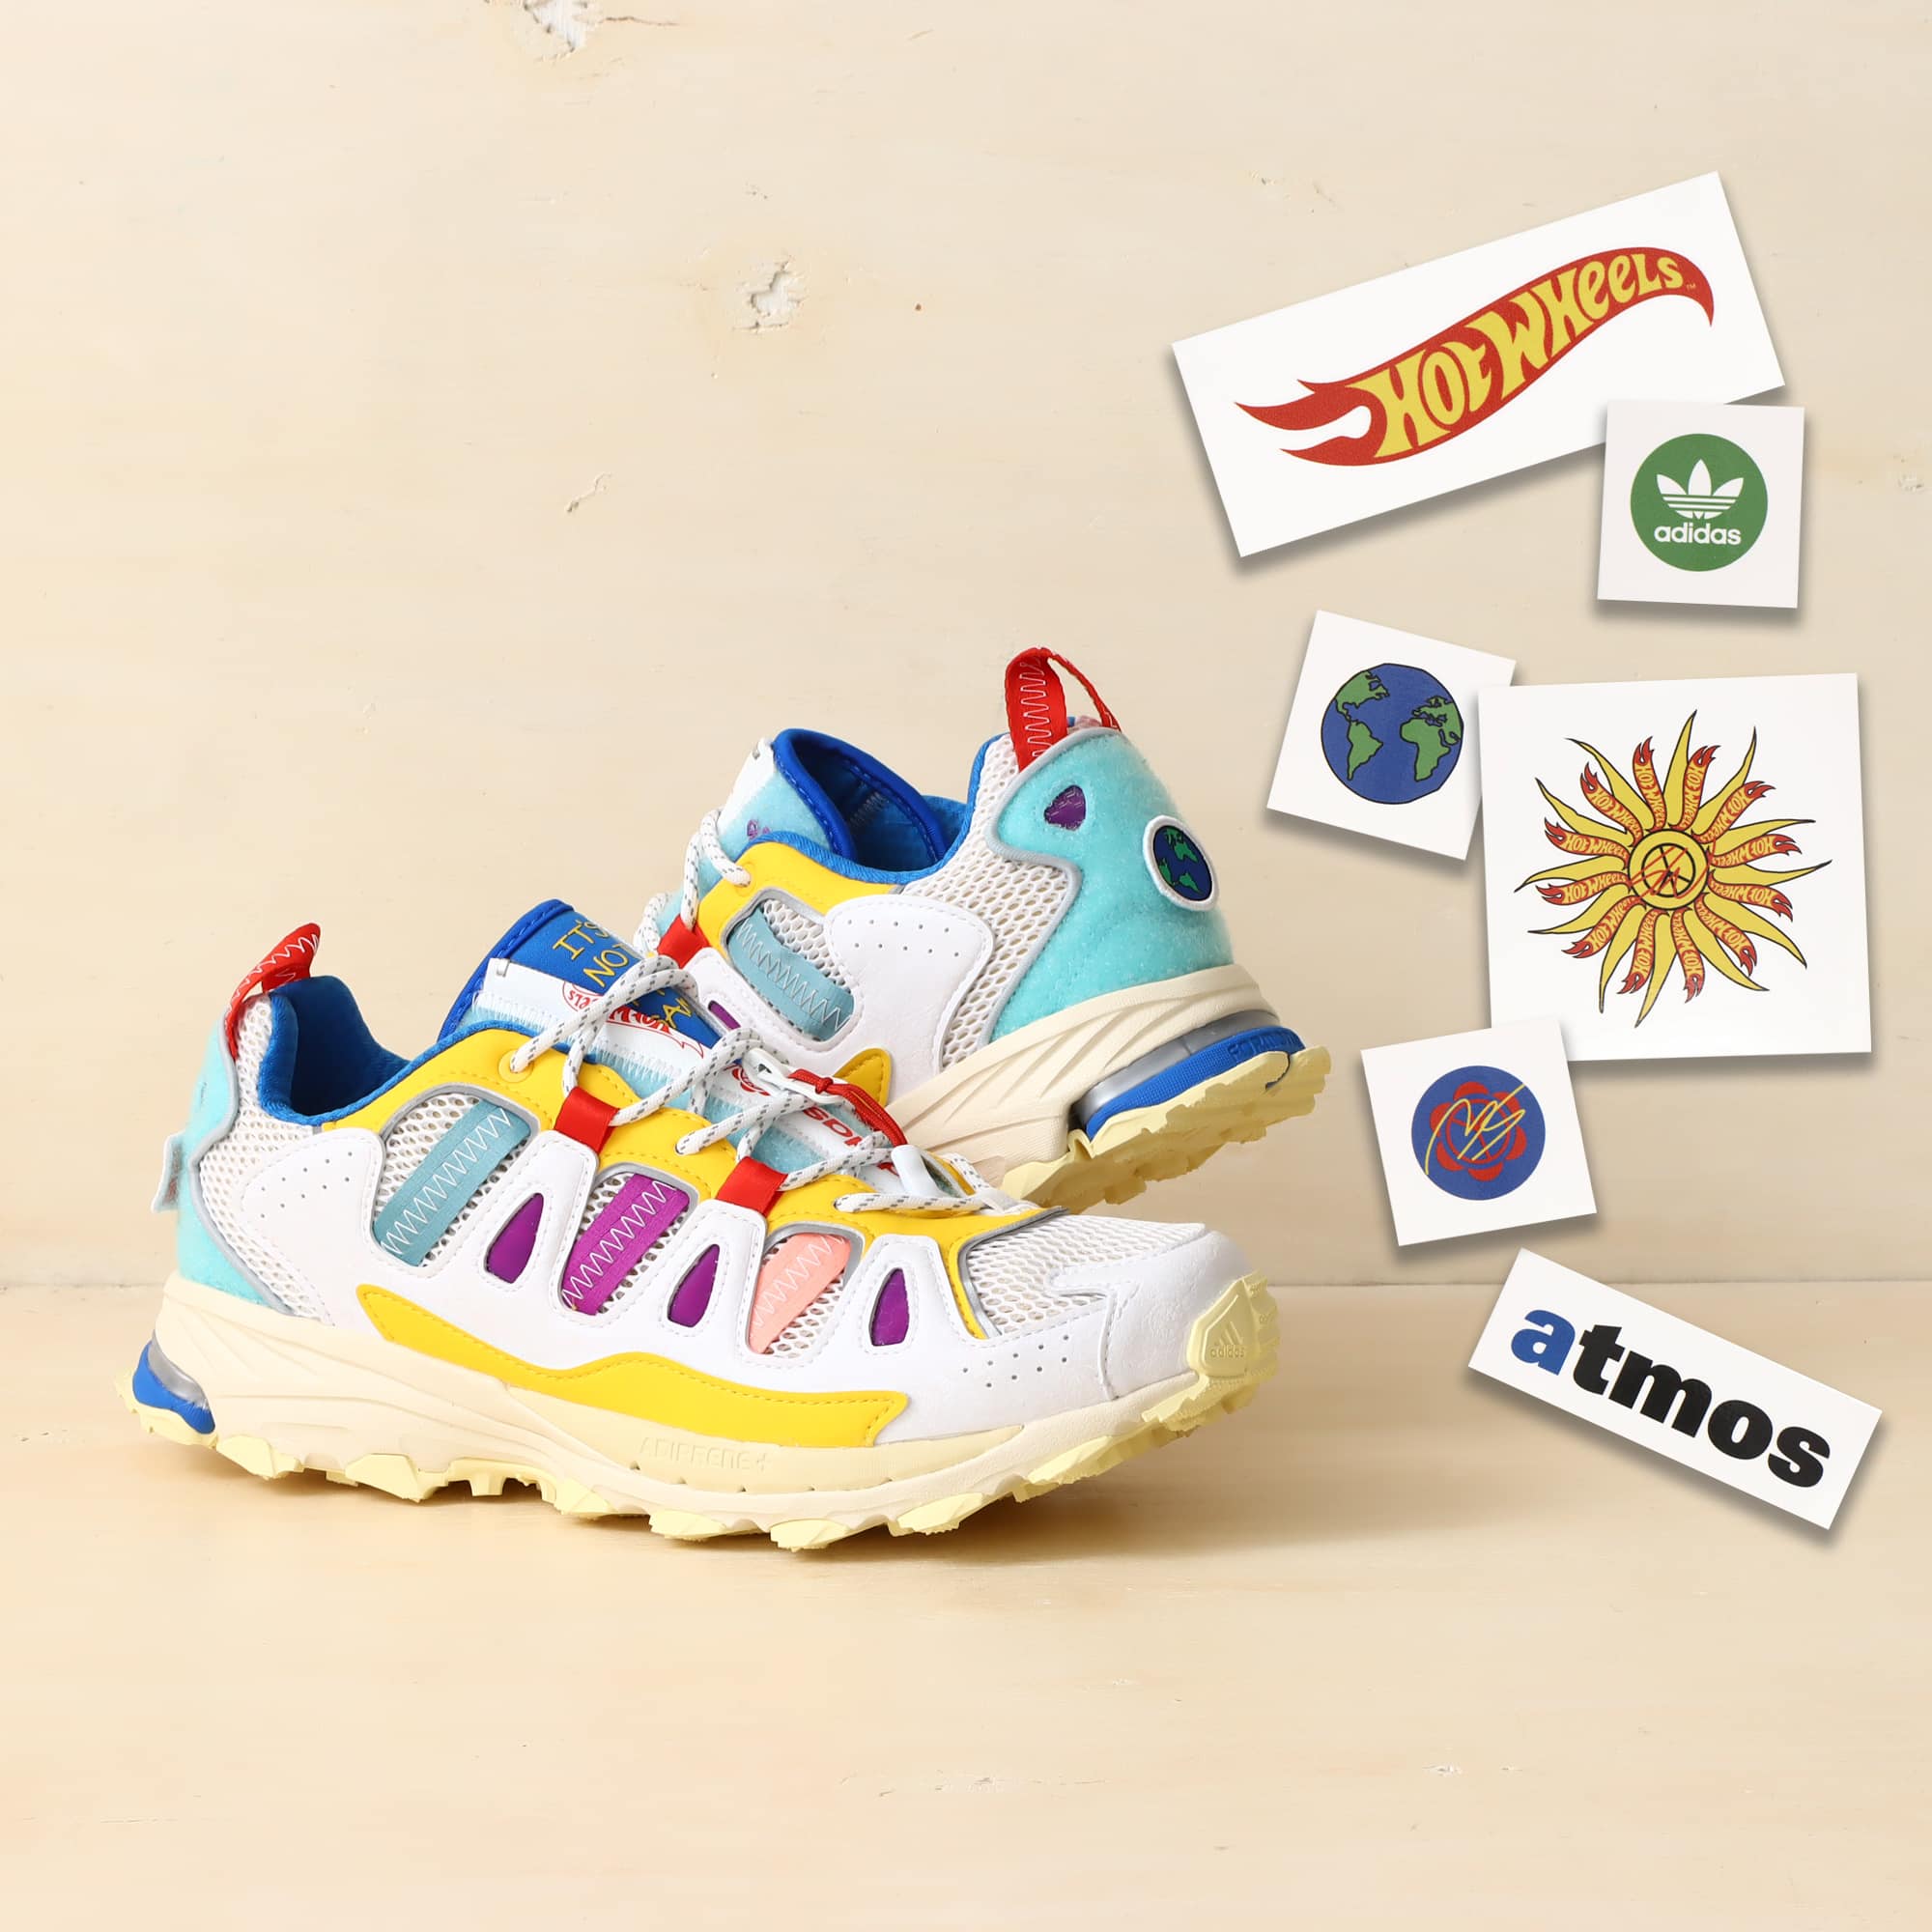 adidas × Sean Wotherspoon × Hot Wheels Collaboration Collection